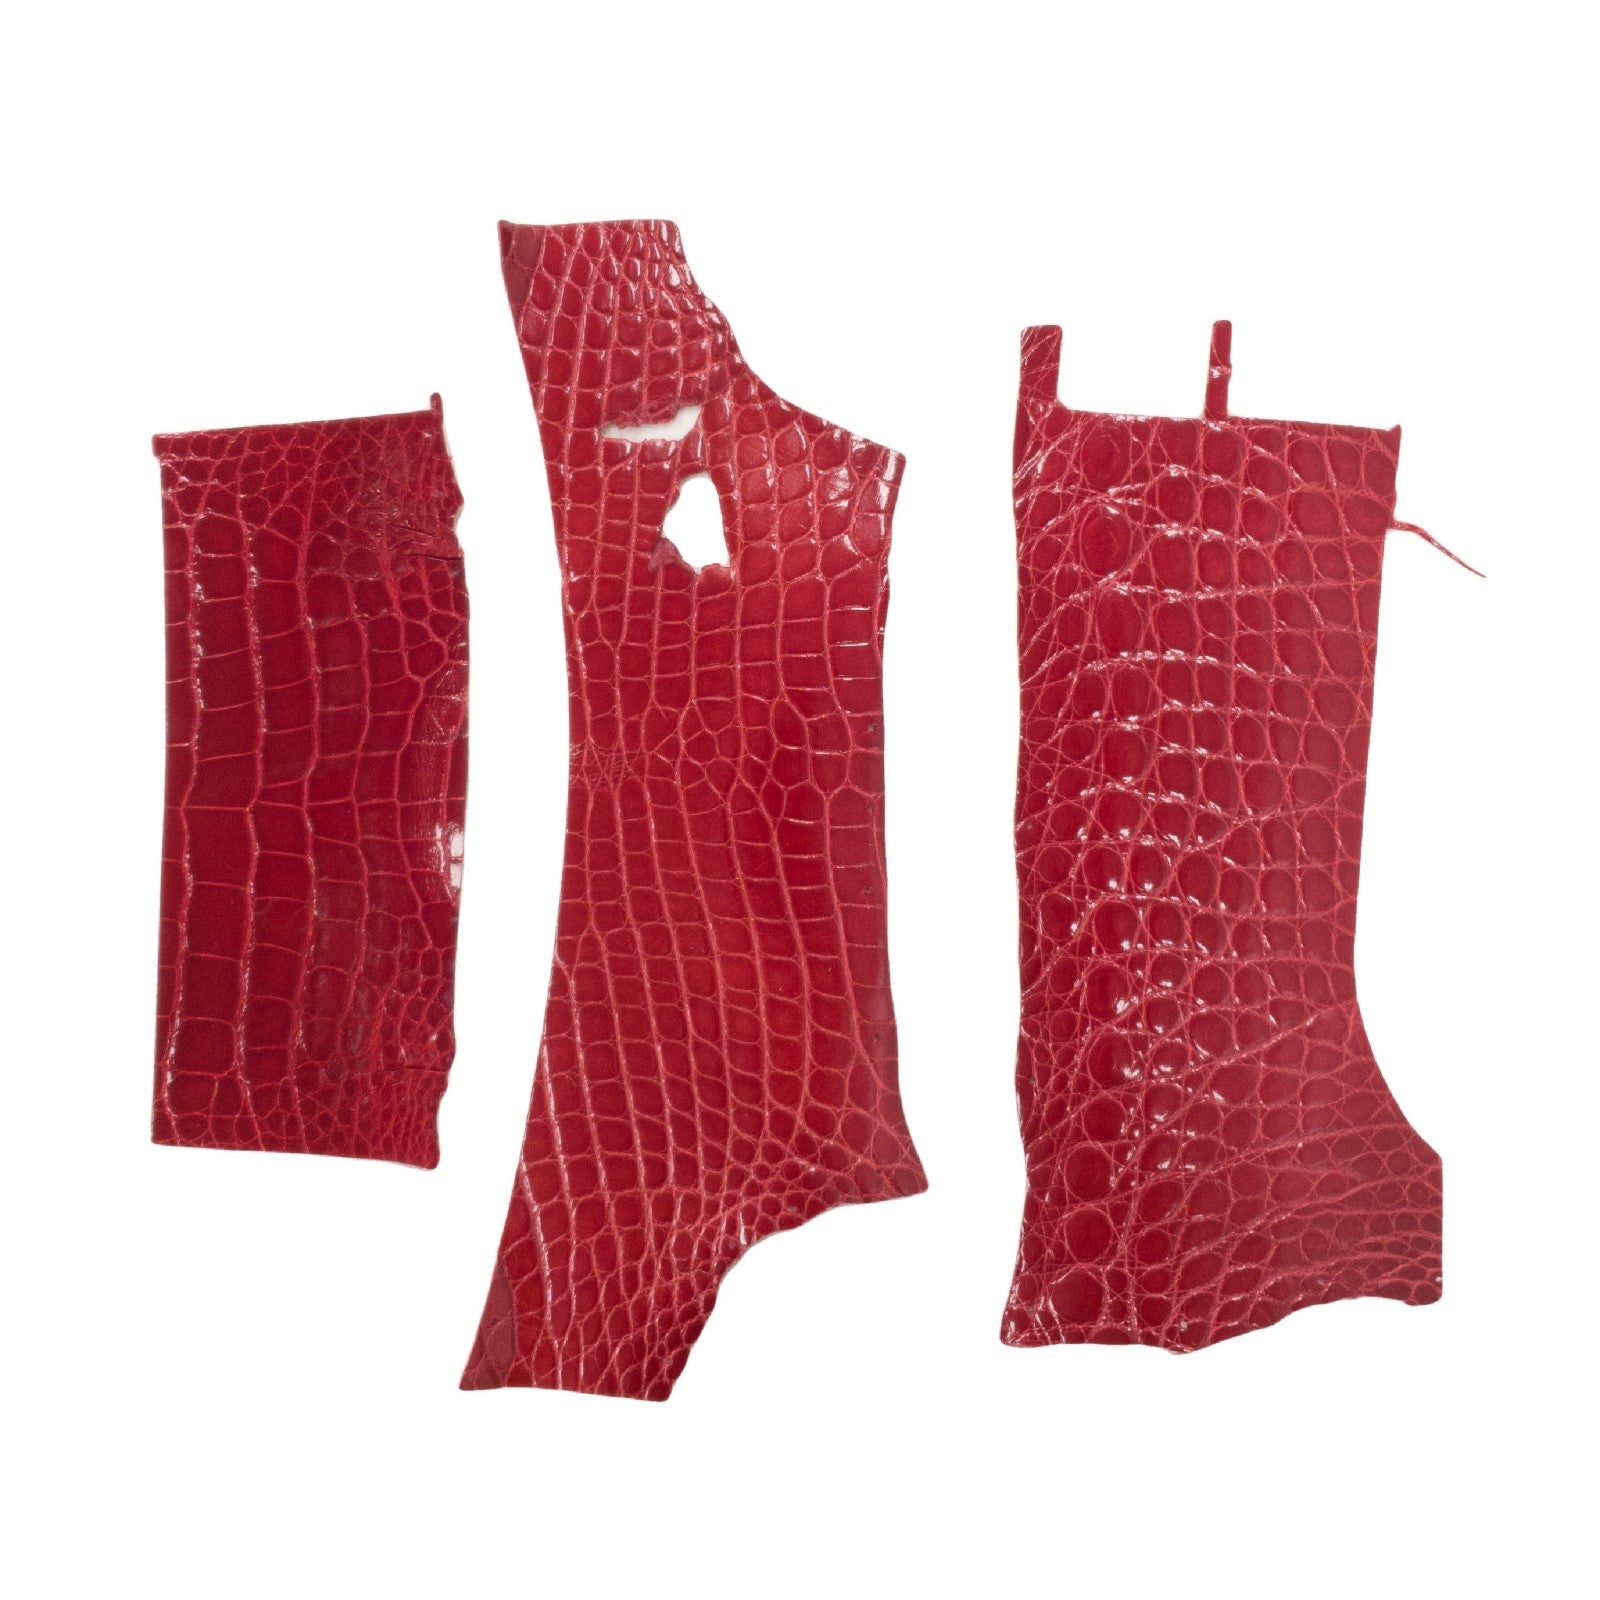 Alligator Skin Pieces Various Colors Genuine Hide, Red / Piece 2 | The Leather Guy